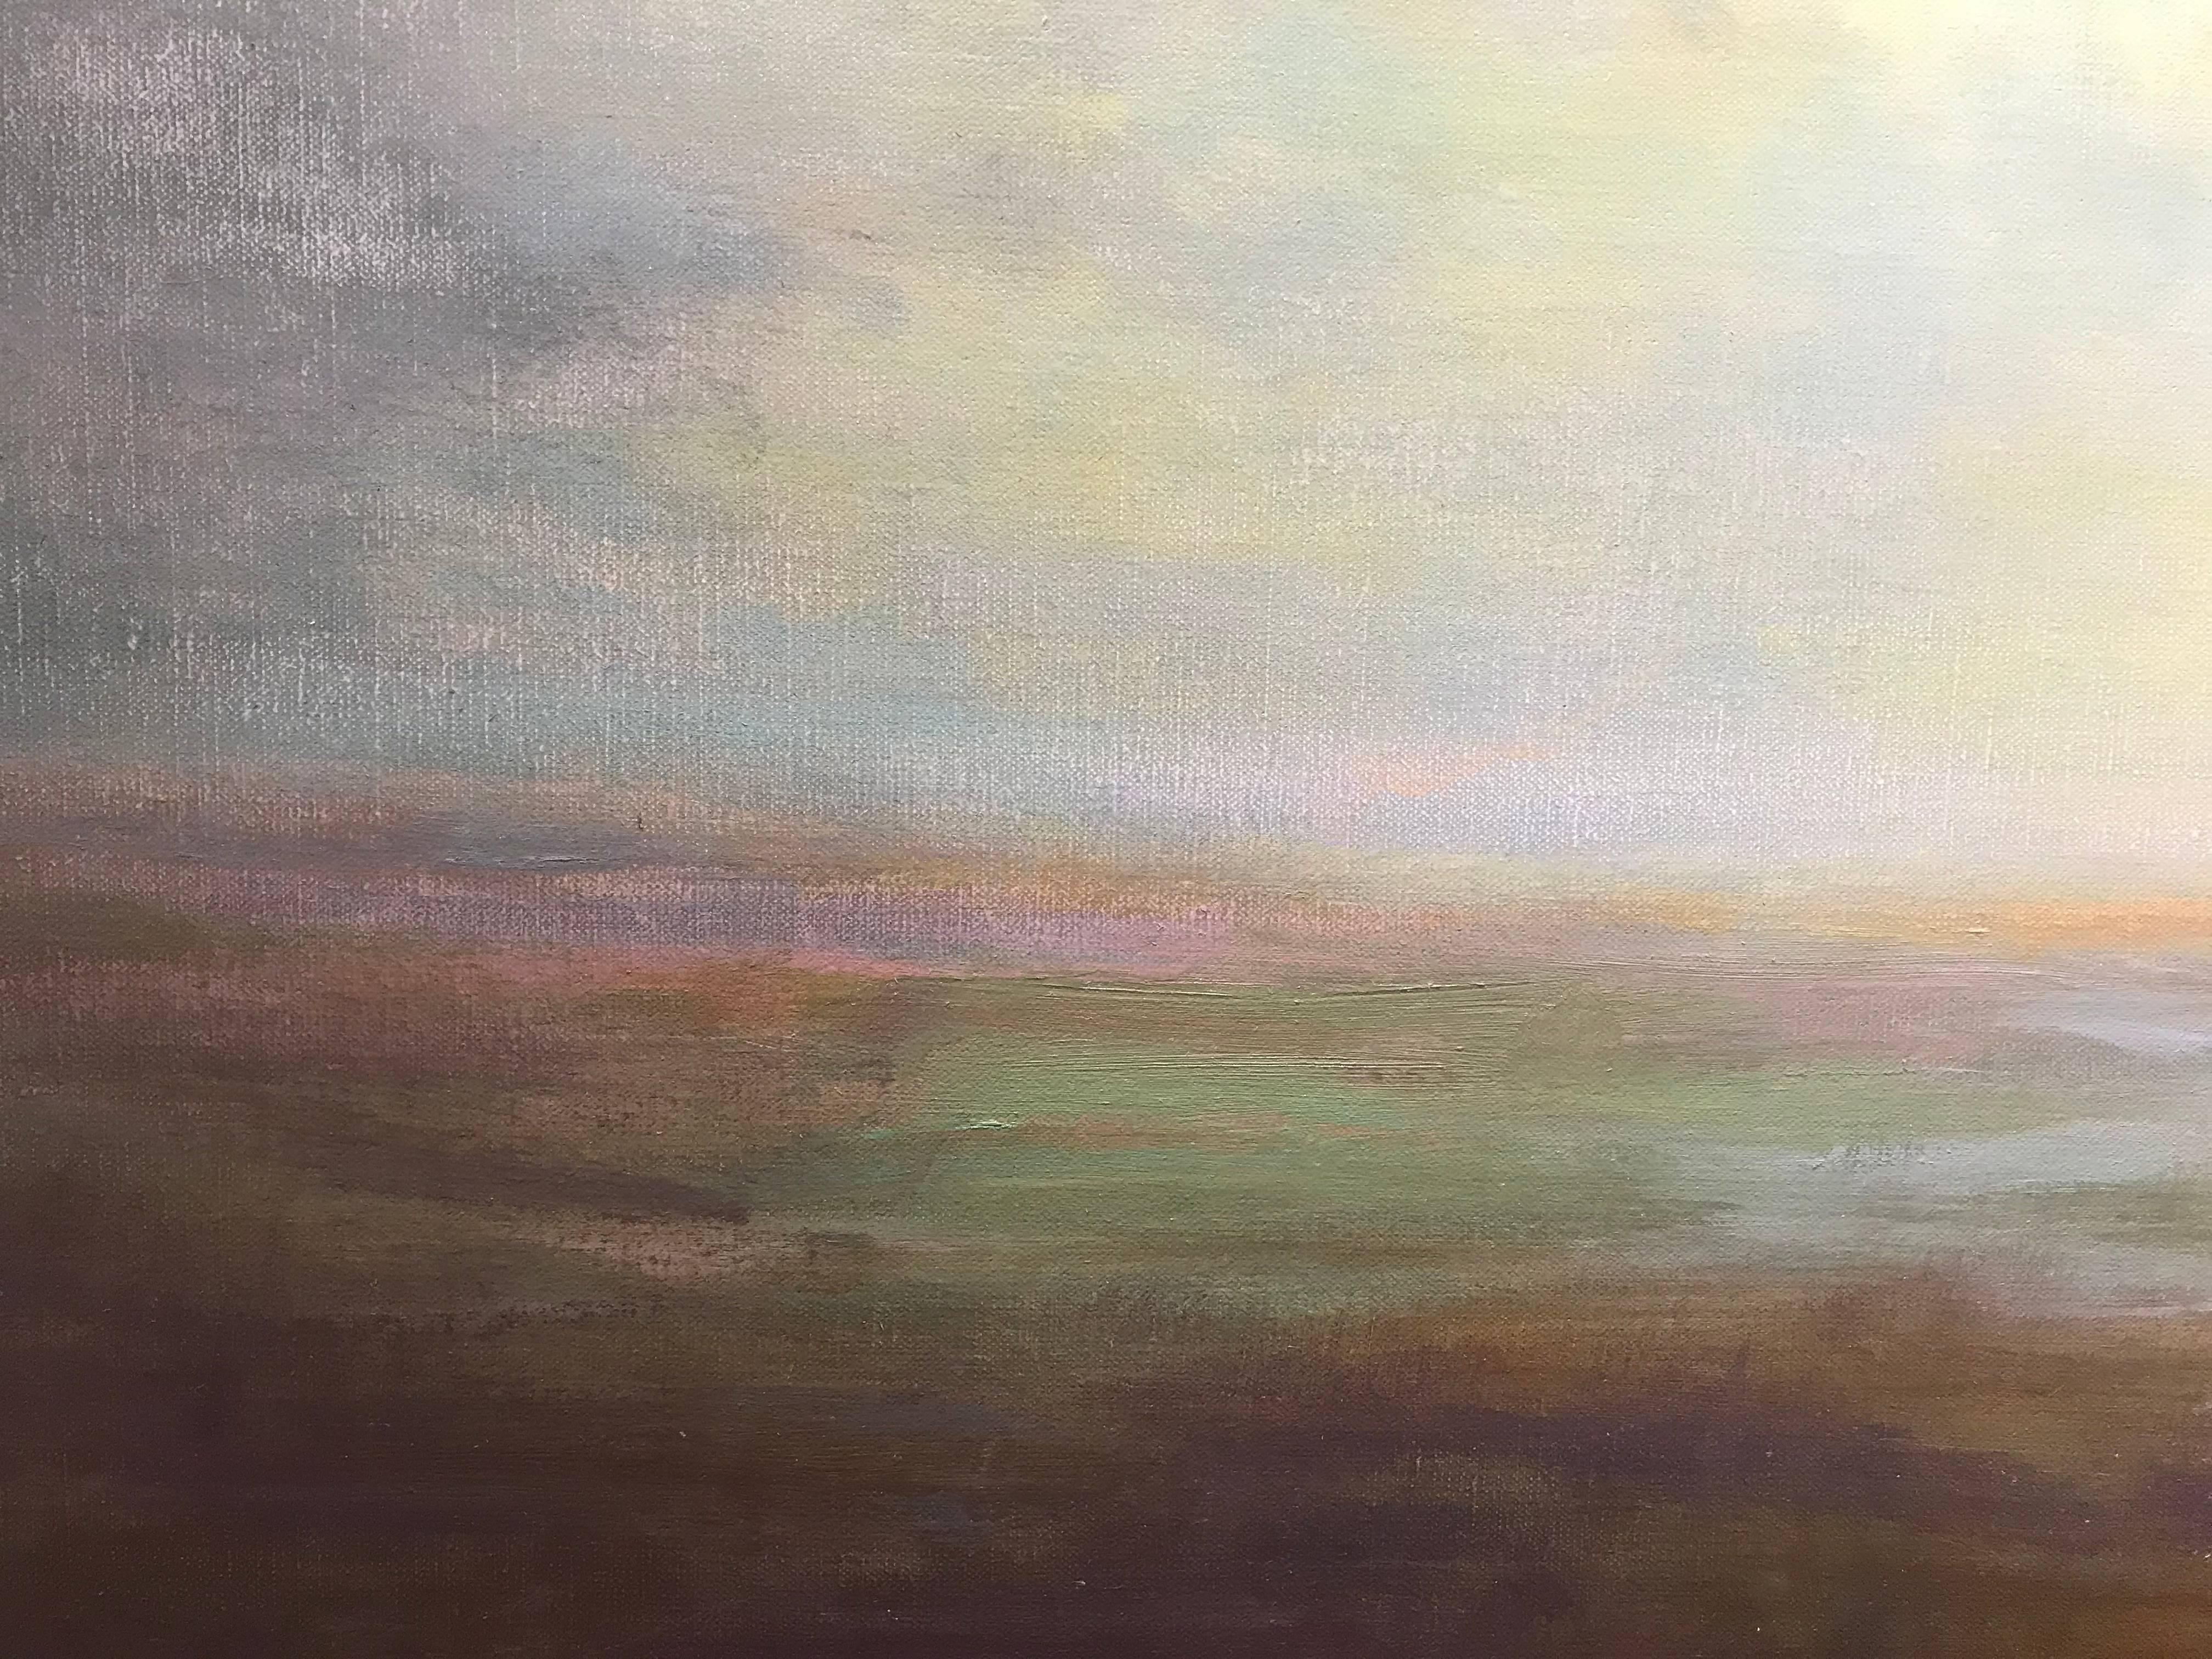 'Morning at Thomas Point' is a large Post-Impressionist landscape oil on linen painting created by American artist Julie Houck in 2017. This square format features a soft palette, mostly made of purple, yellow, brown, orange and green tones. Thomas